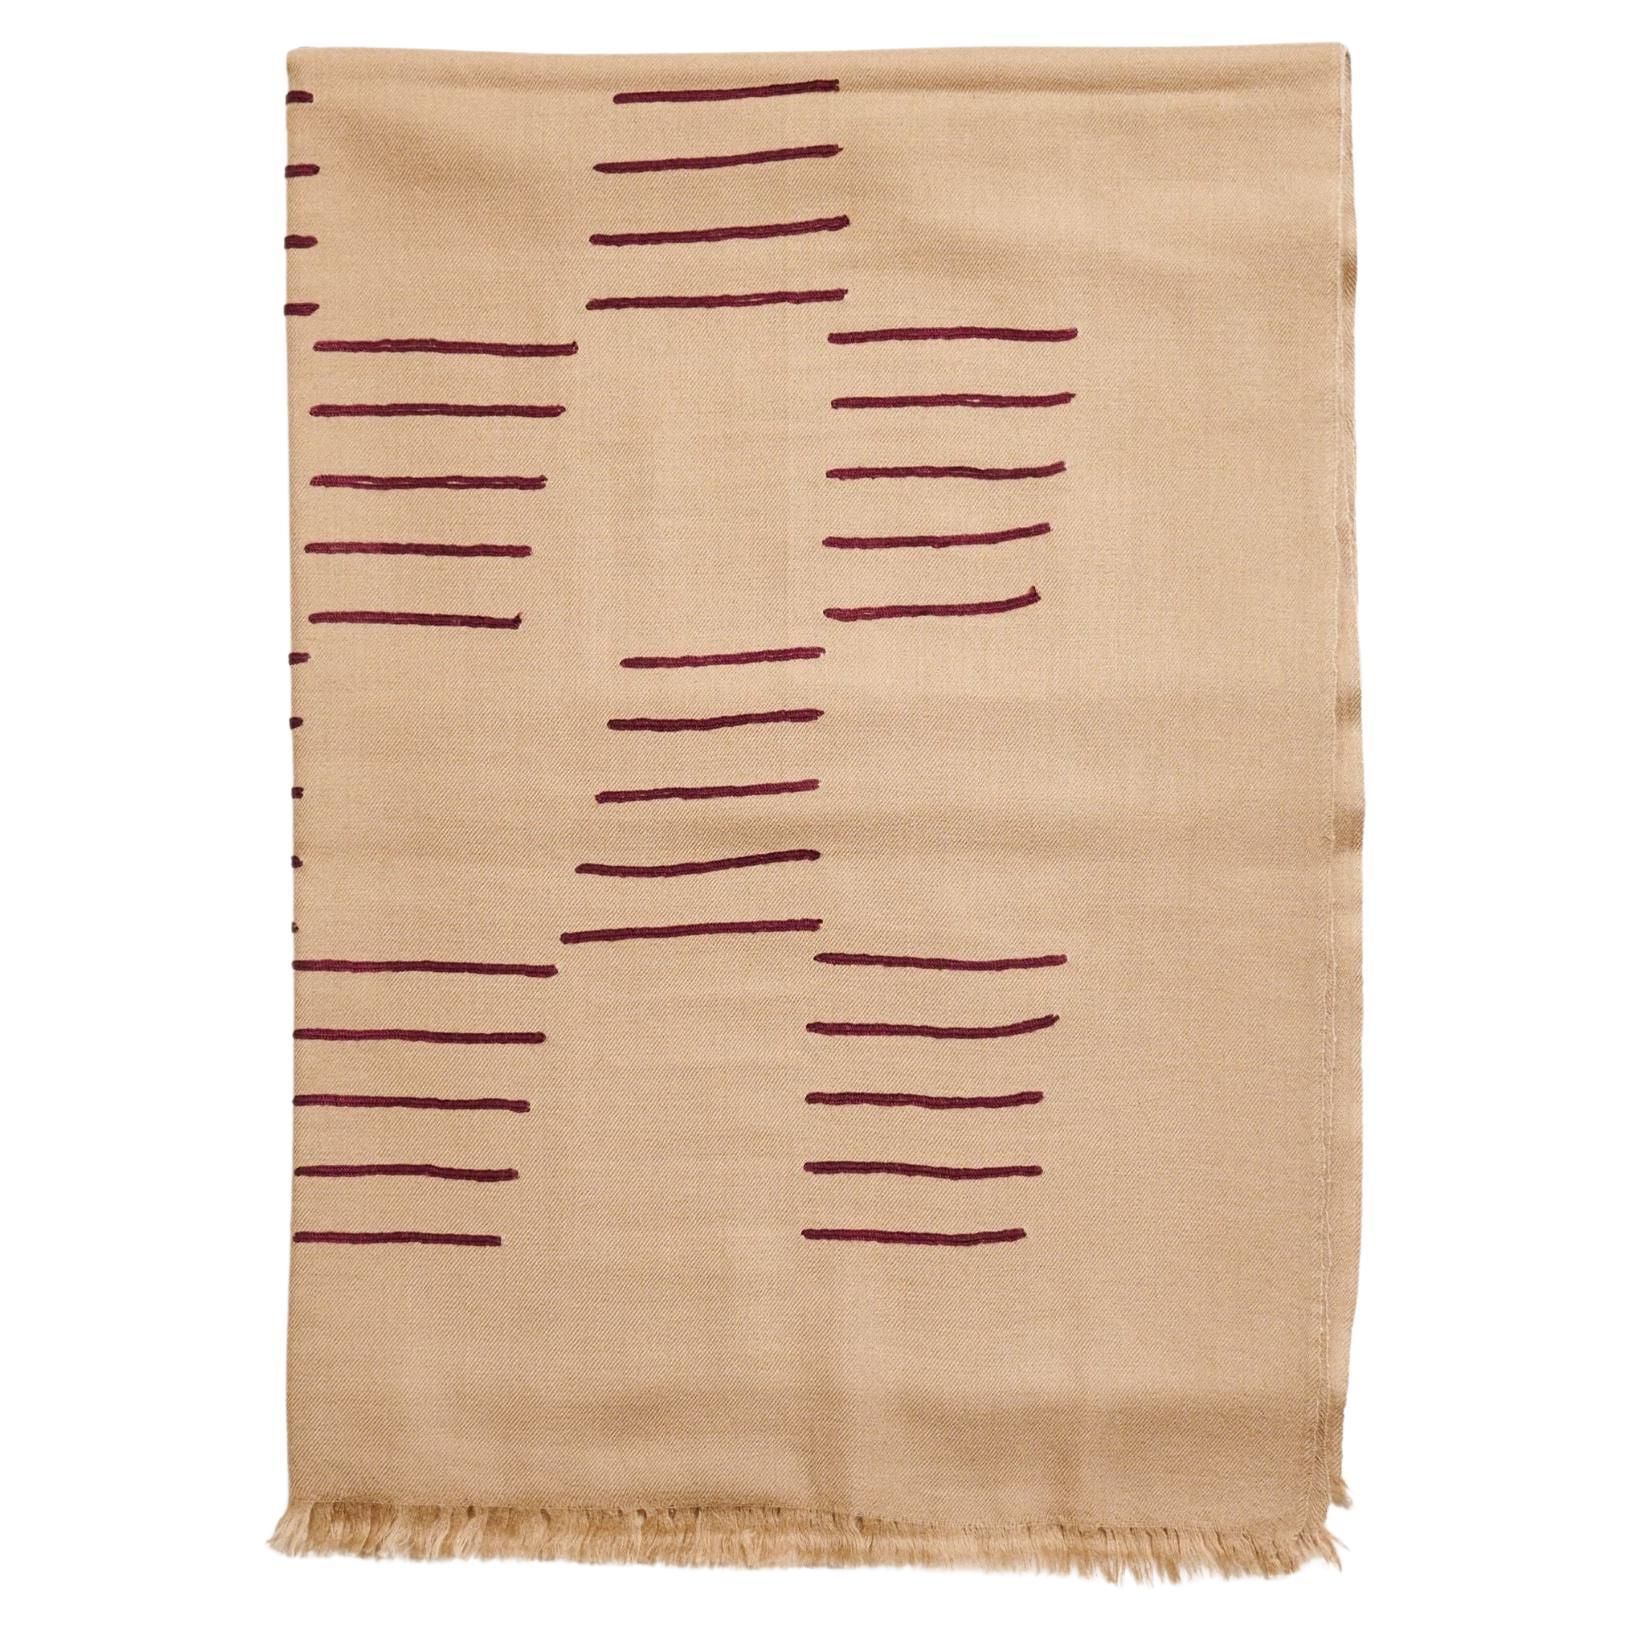 Coming together with heritage artisan cluster from the valleys of Kashmir, Variously brings to you a special collection of handwoven and hand embroidered scarves.

Maple is an expression of the finery of our custom design expertly hand-woven by hand